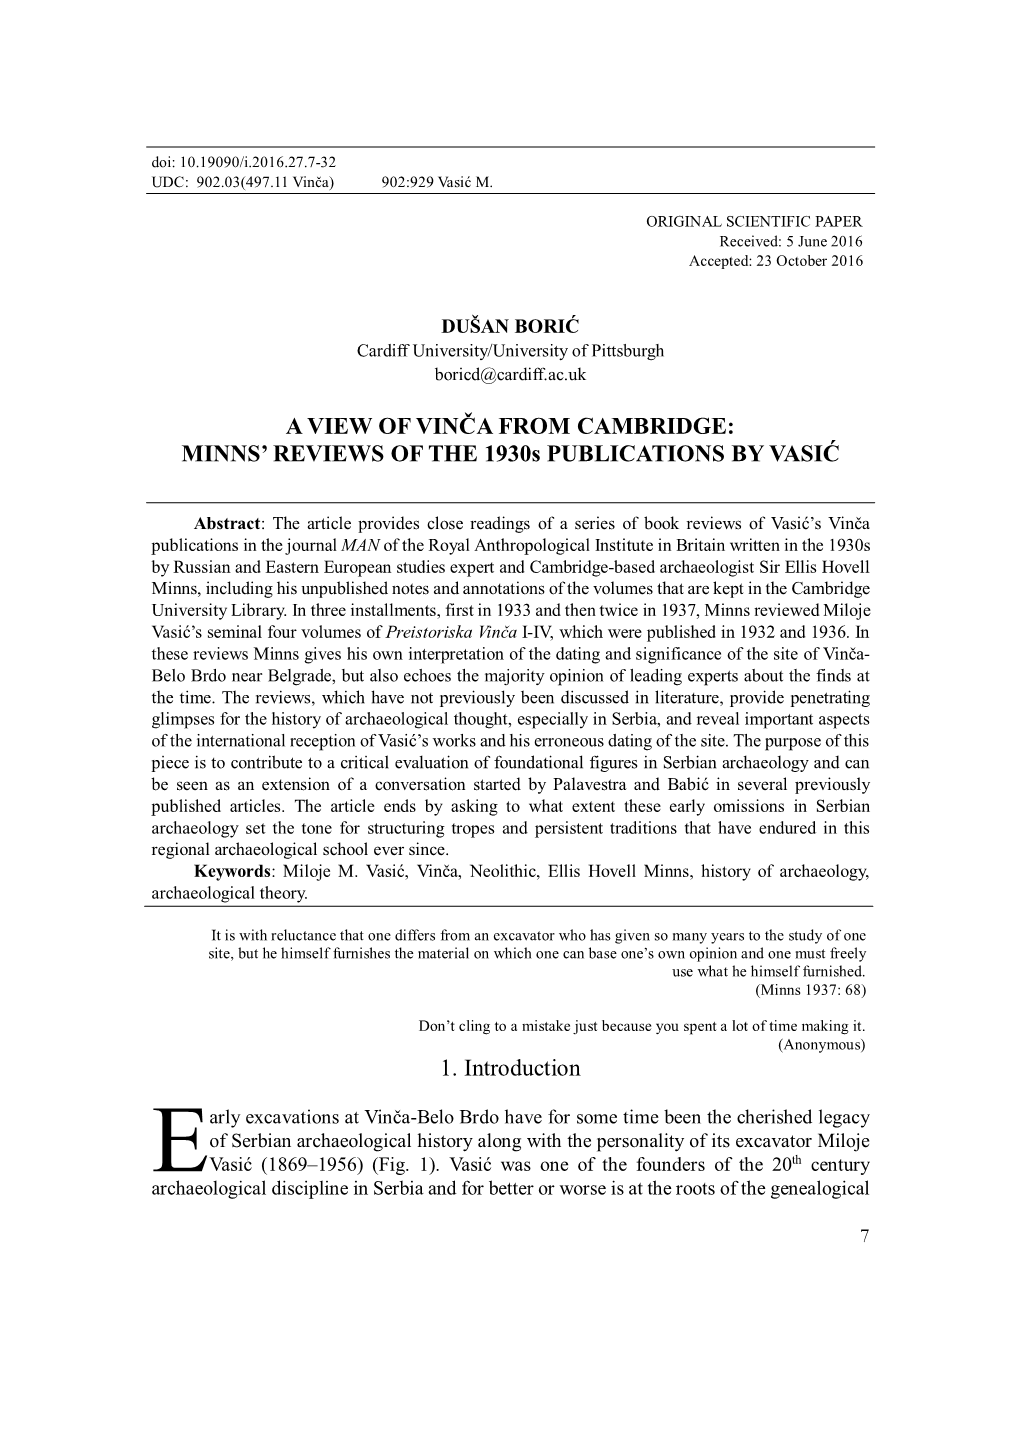 A VIEW of VINČA from CAMBRIDGE: MINNS’ REVIEWS of the 1930S PUBLICATIONS by VASIĆ